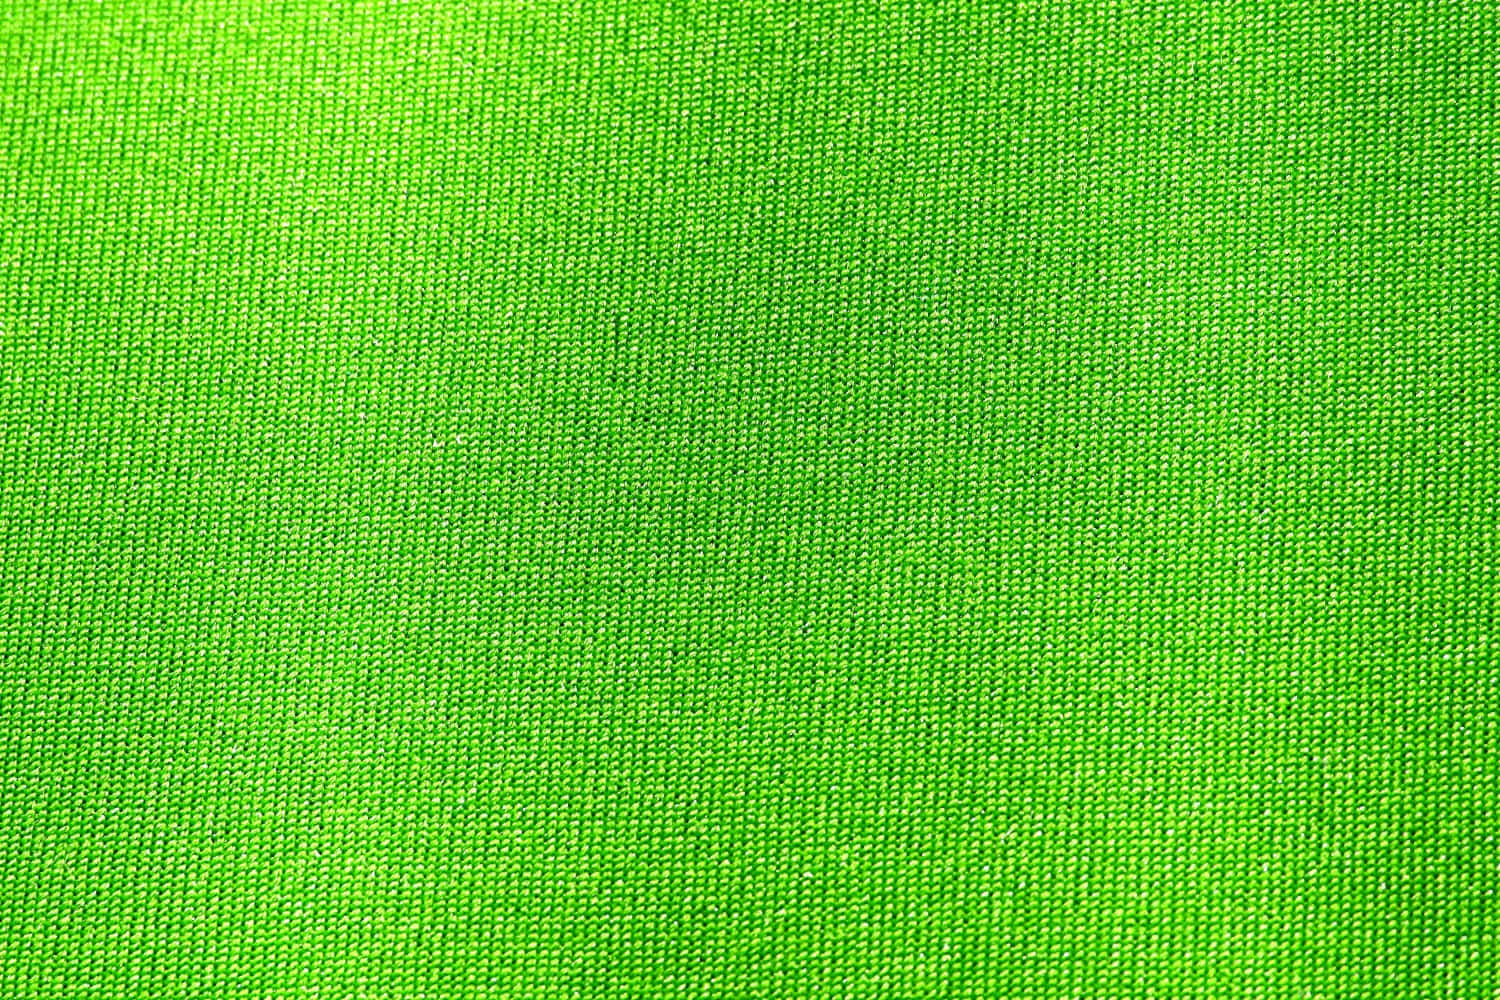 Fabric Texture Picture Neon Green